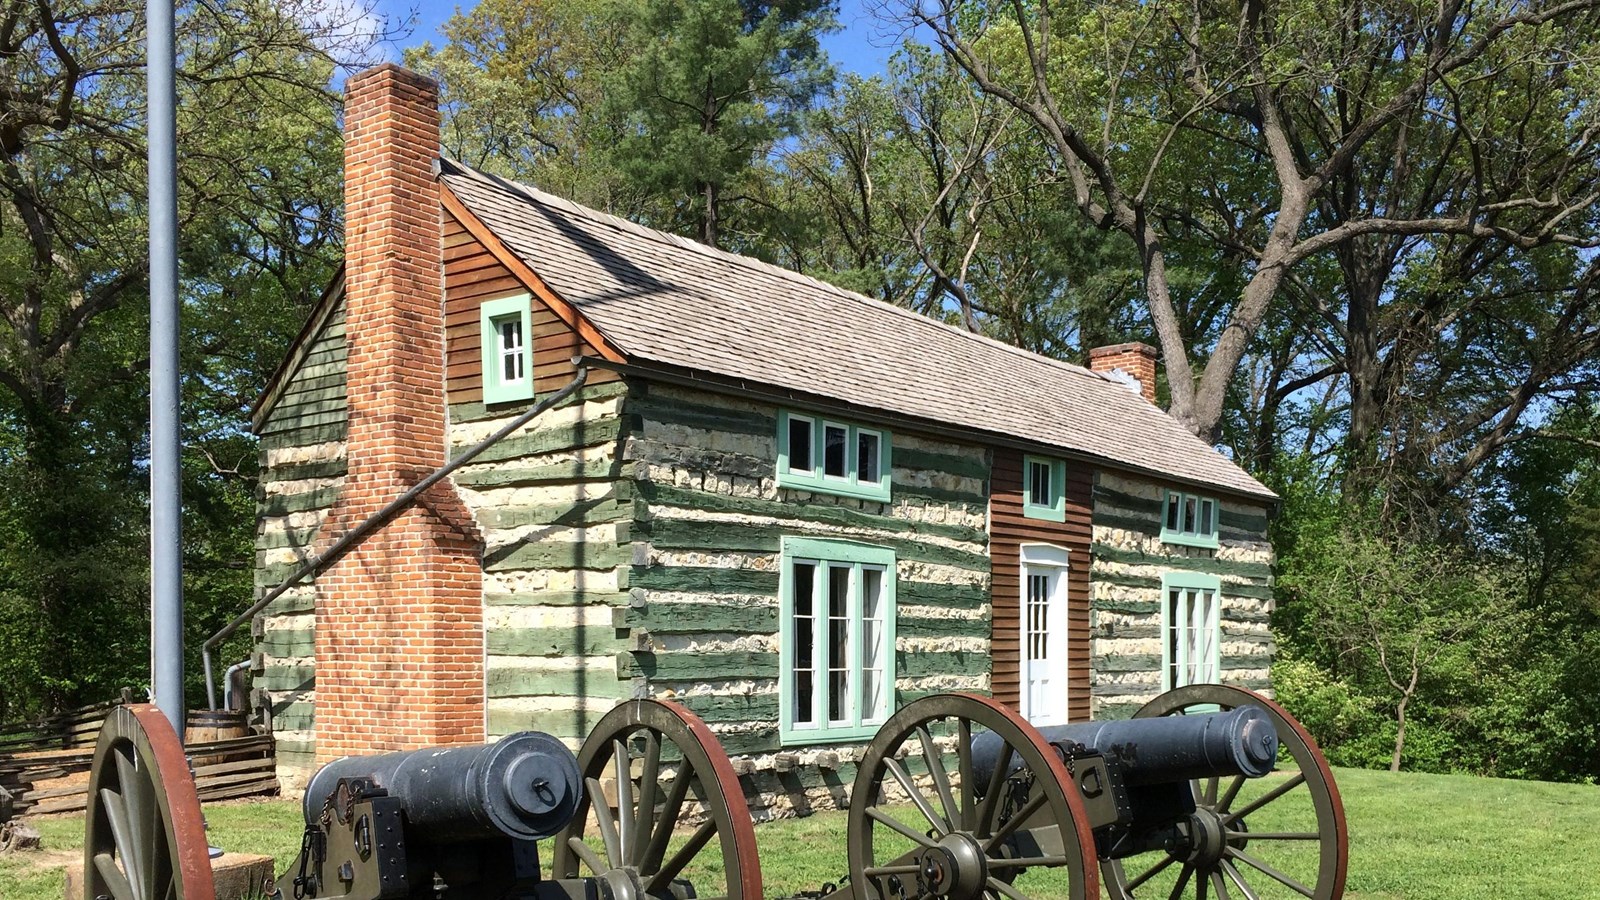 The Hardscrabble log cabin with Howitzer cannons in the foreground.